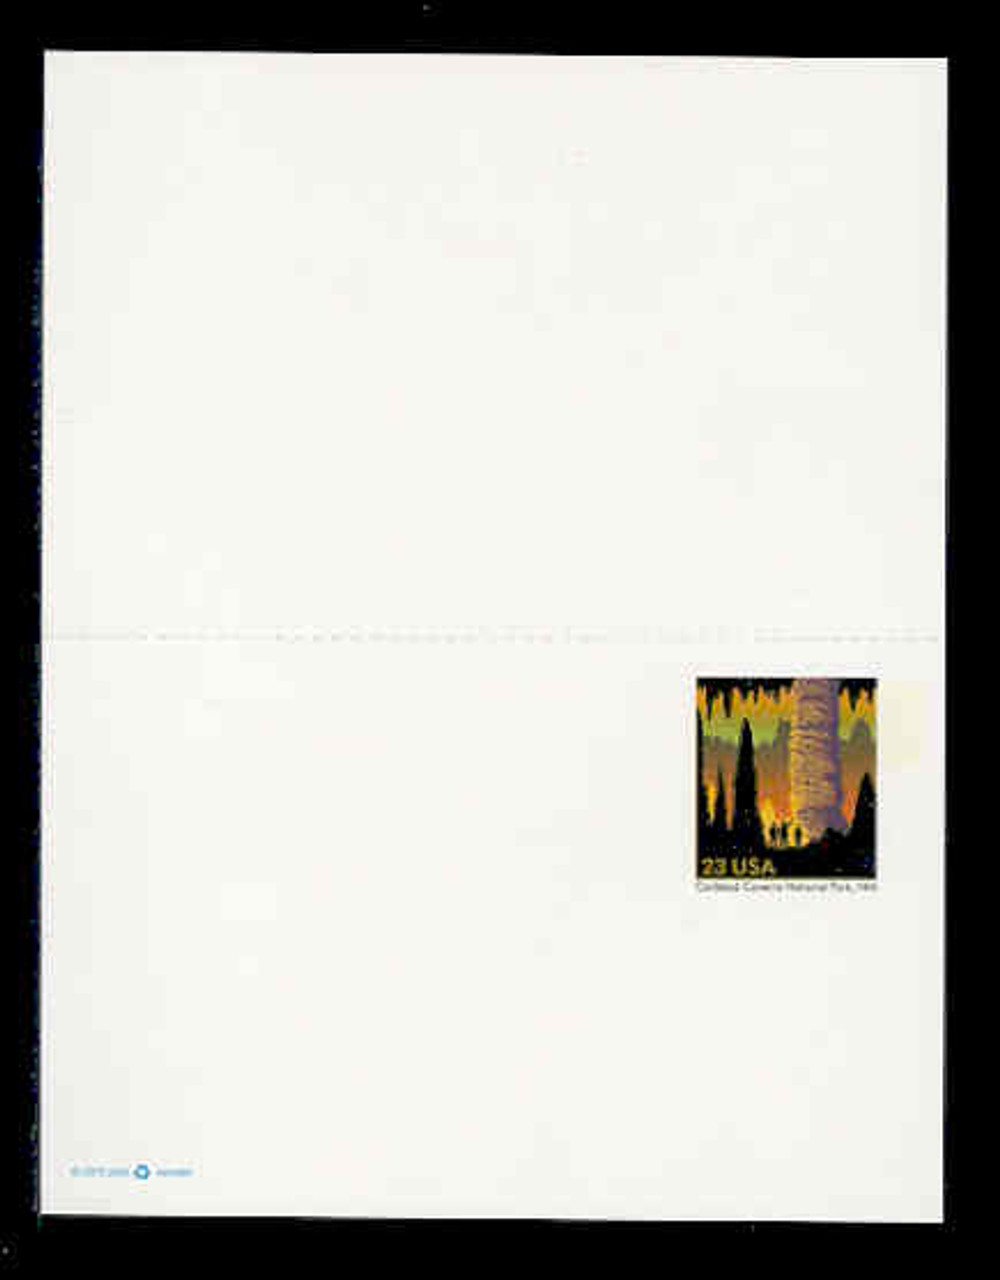 USA Scott # UY 44, 2002 23c Carlsbad Caverns National Park - Mint Message-Reply Card - UNFOLDED